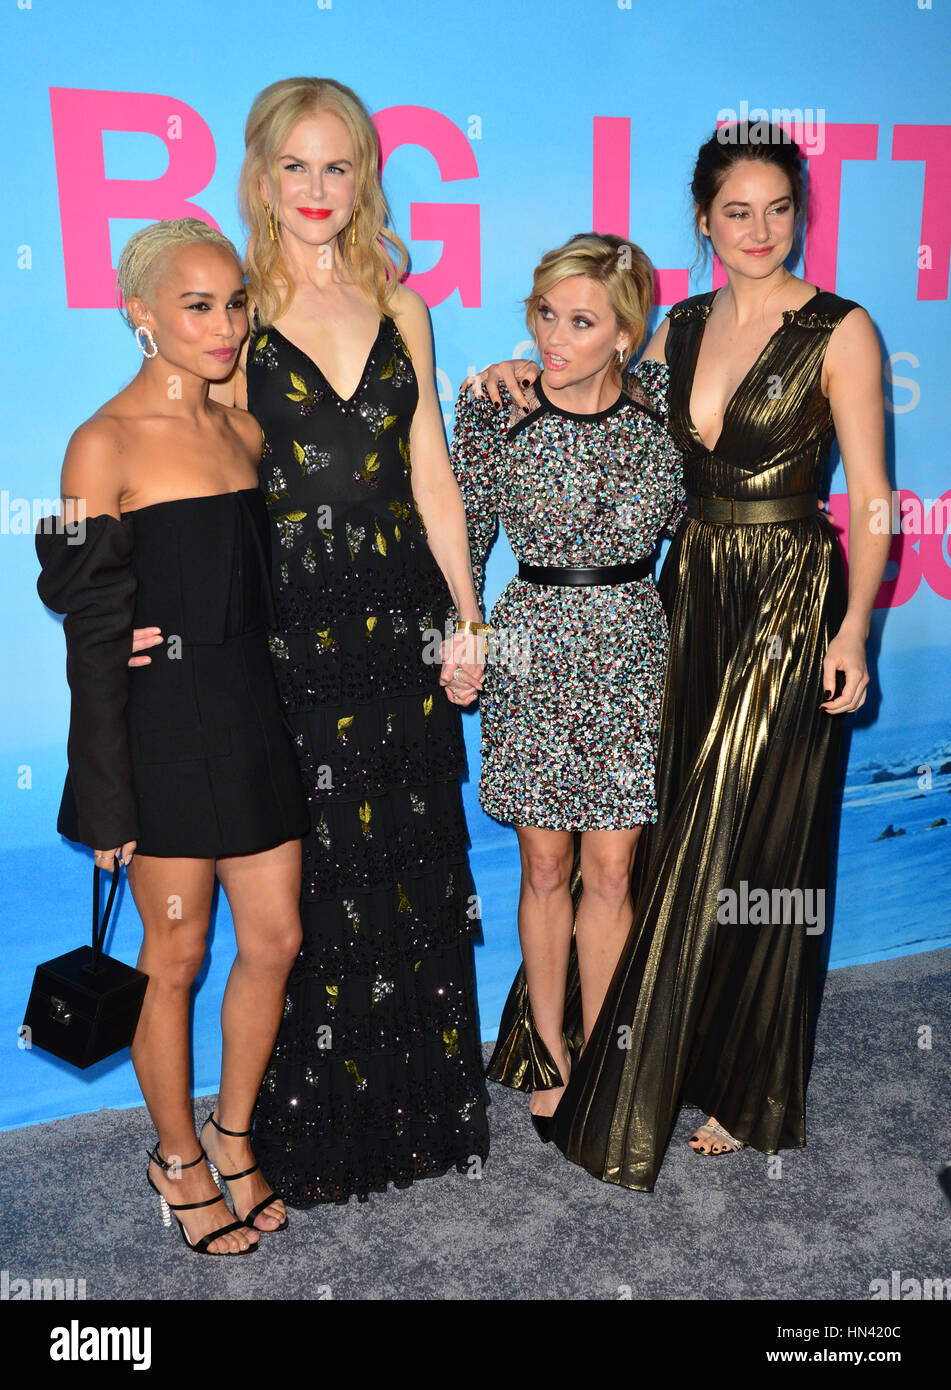 Los Angeles, USA. 07th Feb, 2017. Actresses Zoe Kravitz, Nicole Kidman, Reese Witherspoon & Shailene Woodley at the premiere for HBO's 'Big Little Lies' at the TCL Chinese Theatre, Hollywood. Picture Credit: Sarah Stewart/Alamy Live News Stock Photo